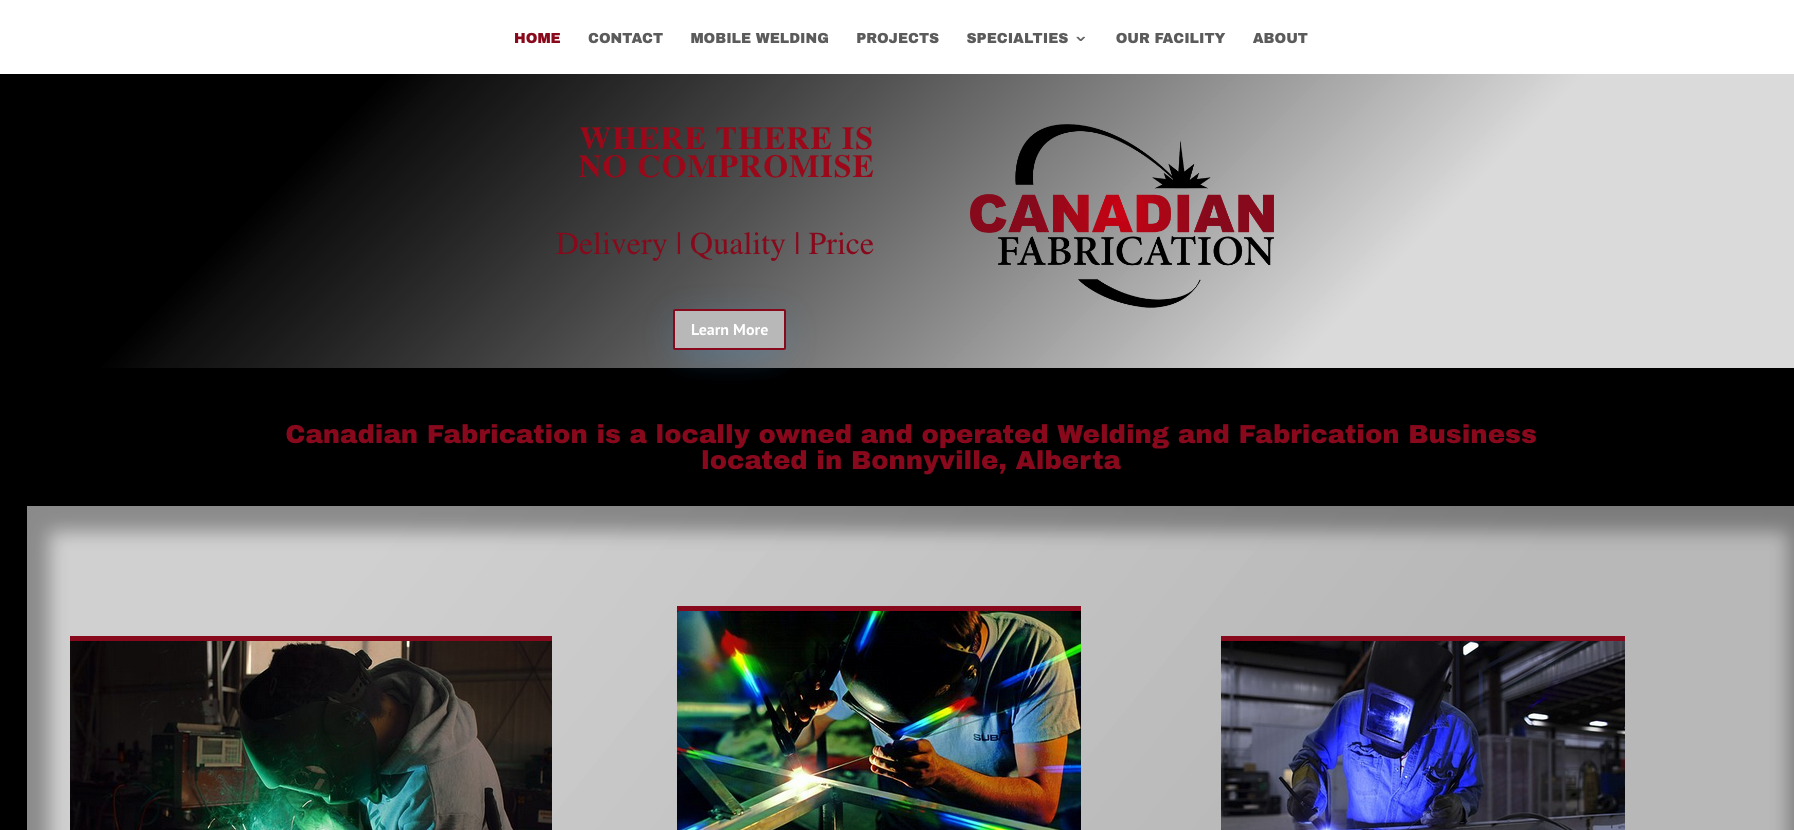 Canadian Fabrication-Home Page